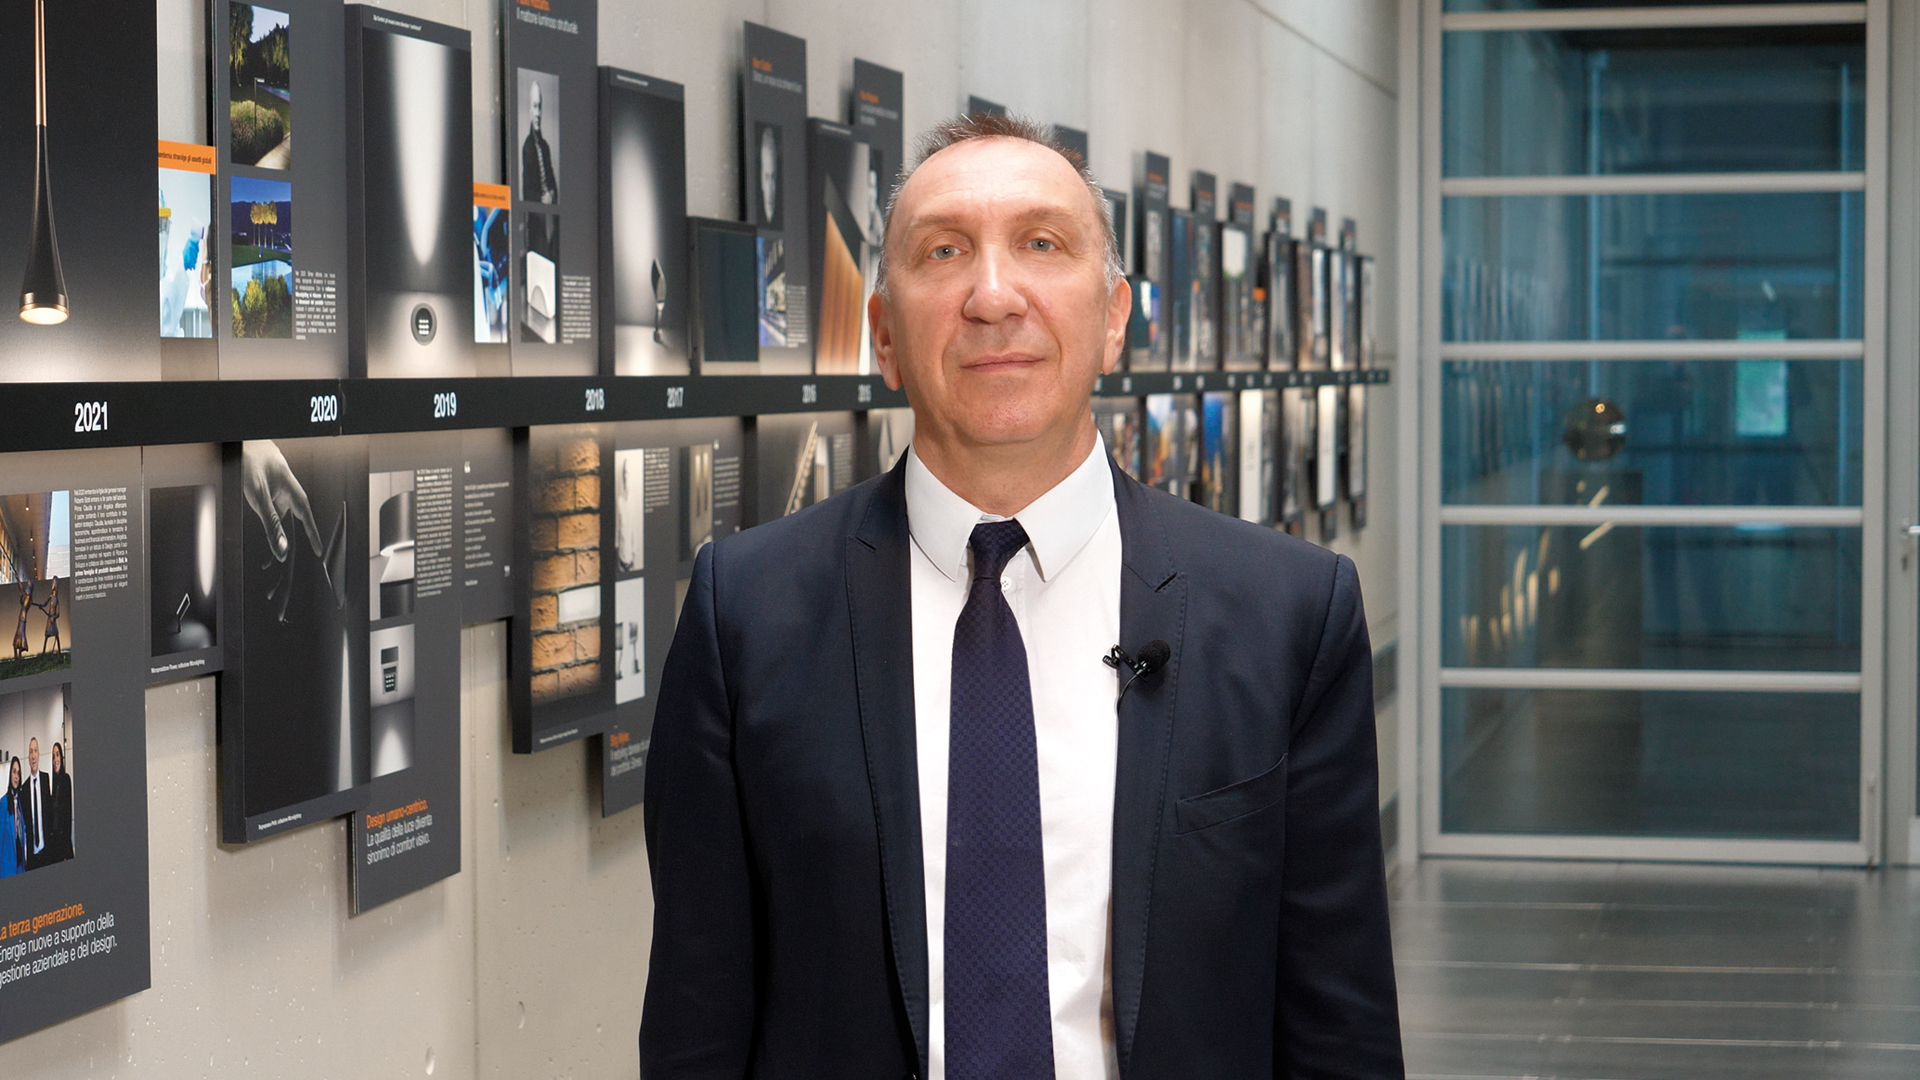 Roberto Botti, General Manager of Simes S.p.A.